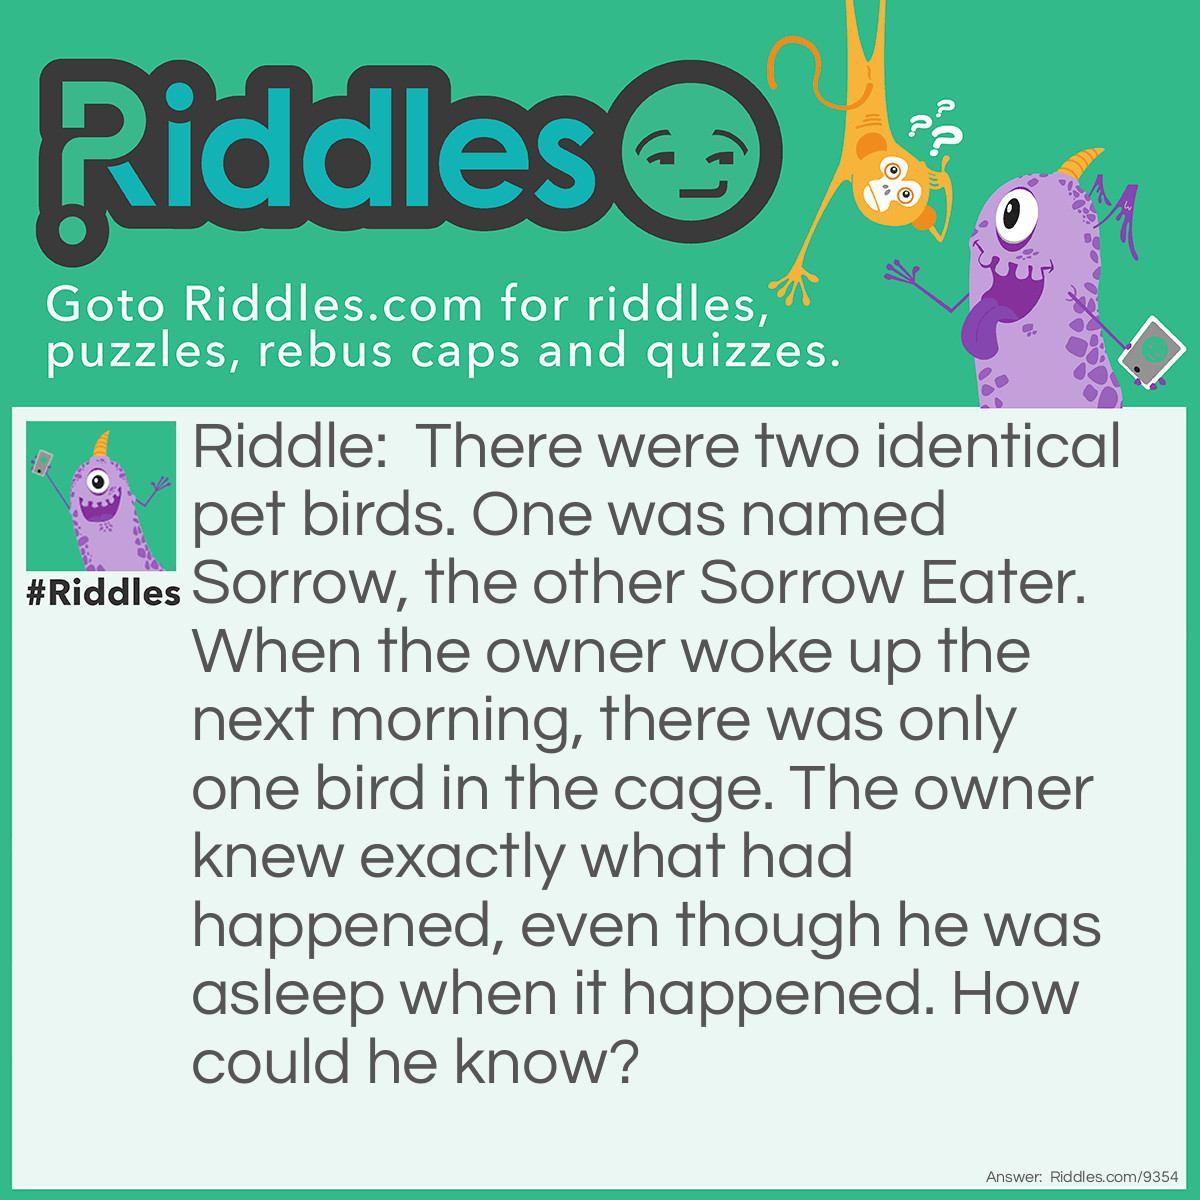 Riddle: There were two identical pet birds. One was named Sorrow, the other Sorrow Eater. When the owner woke up the next morning, there was only one bird in the cage. The owner knew exactly what had happened, even though he was asleep when it happened. How could he know? Answer: He planned for it to happen. When he named his birds, he knew that the Sorrow Eater would eat Sorrow, because it was a SORROW EATER.